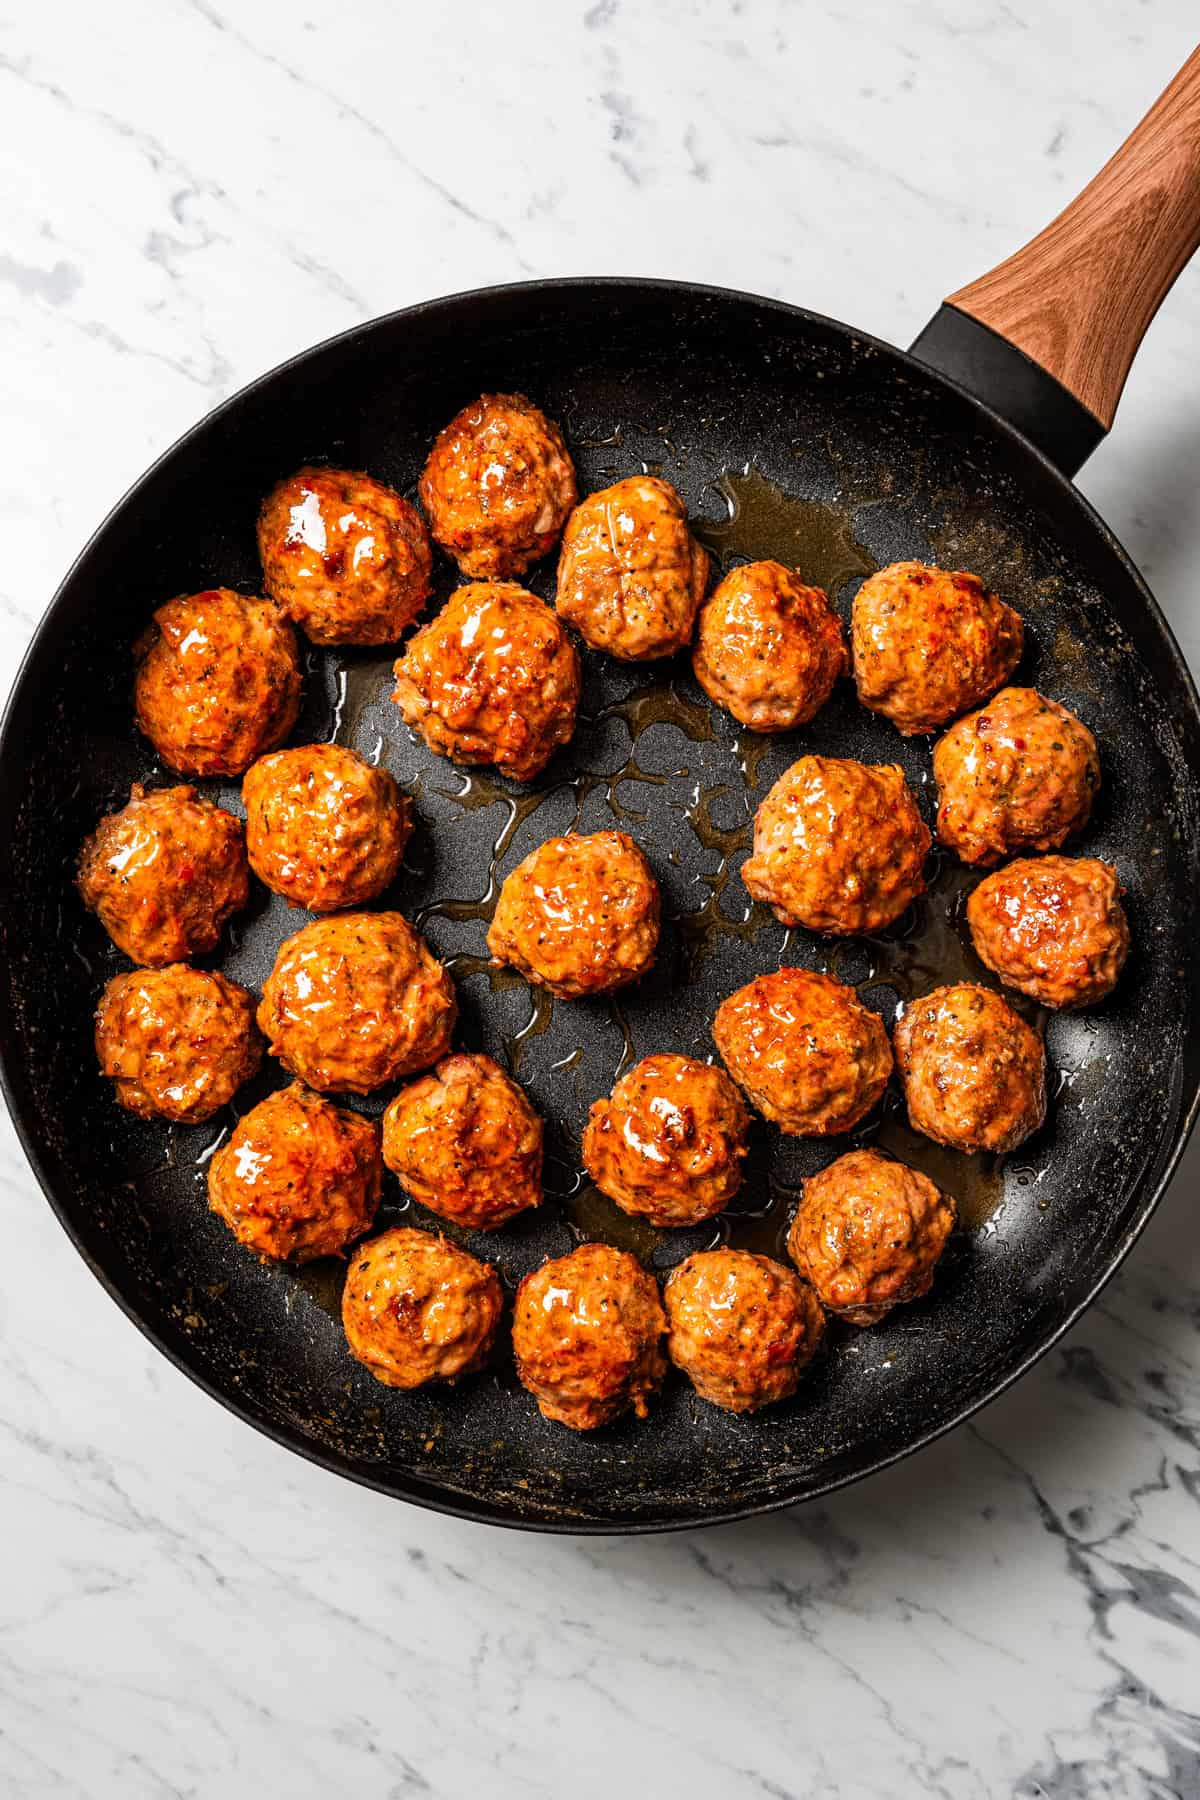 Overhead view of glazed meatballs in a skillet.